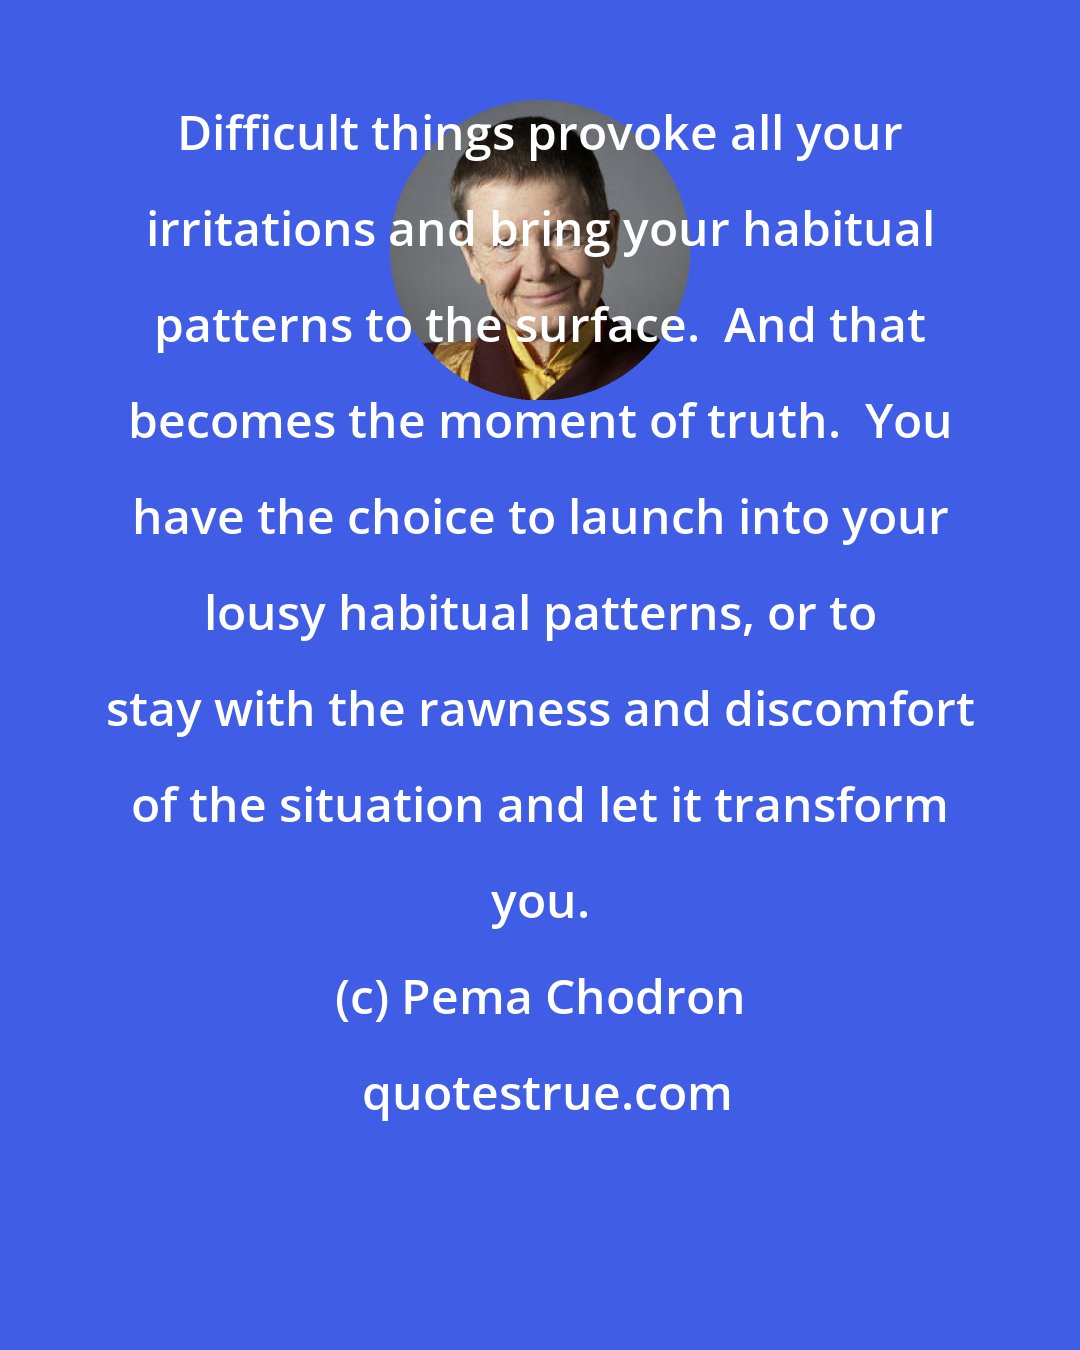 Pema Chodron: Difficult things provoke all your irritations and bring your habitual patterns to the surface.  And that becomes the moment of truth.  You have the choice to launch into your lousy habitual patterns, or to stay with the rawness and discomfort of the situation and let it transform you.